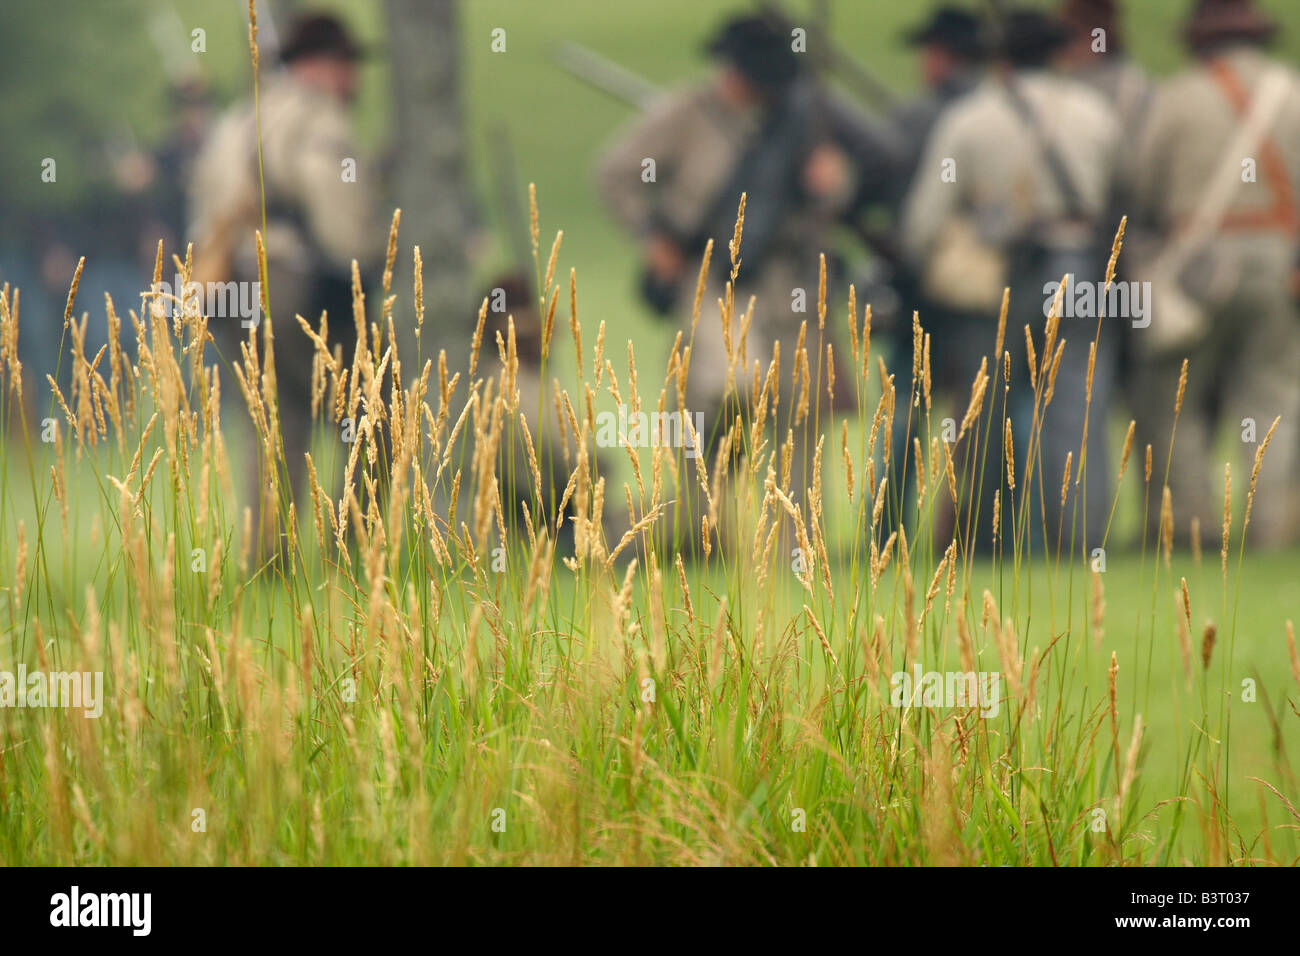 Confederate and Union soldiers face off during a battle at a Civil War Encampment Reenactment Stock Photo